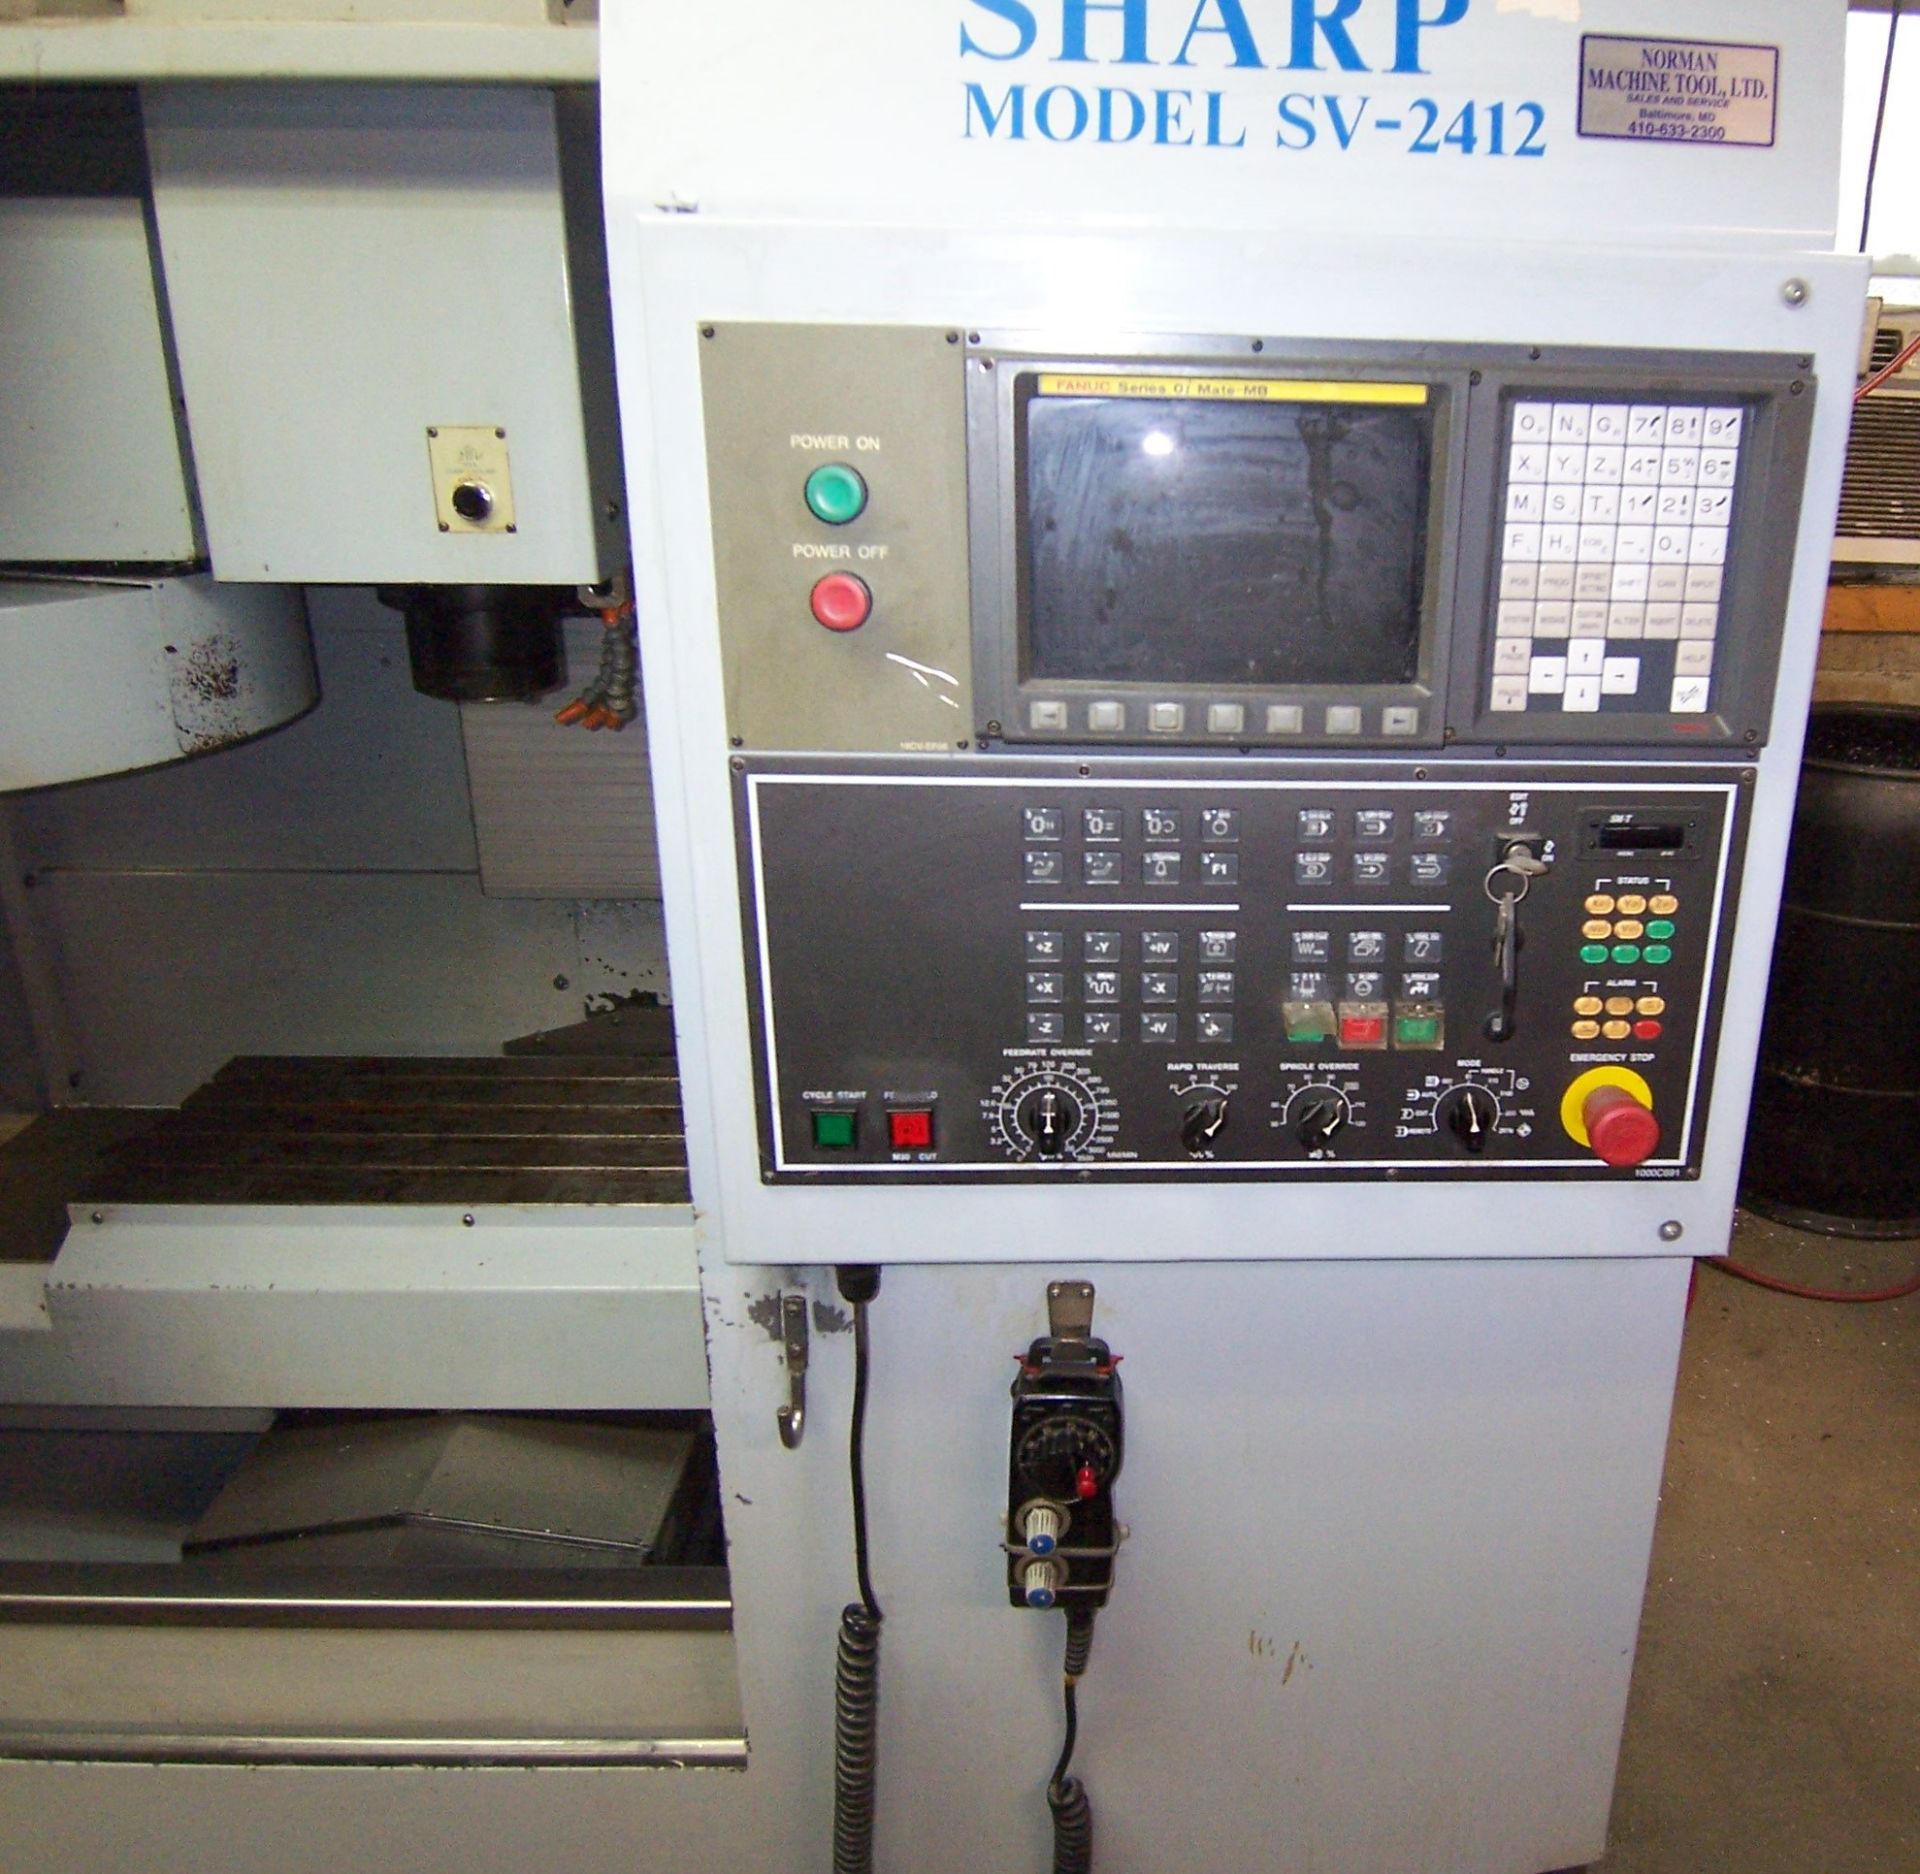 SHARP MDL. SV24125 CNC VERTICAL MACHINING CENTER WITH 16-POSITION AUTOMATIC TOOL CHANGER, 12" X 27- - Image 4 of 5